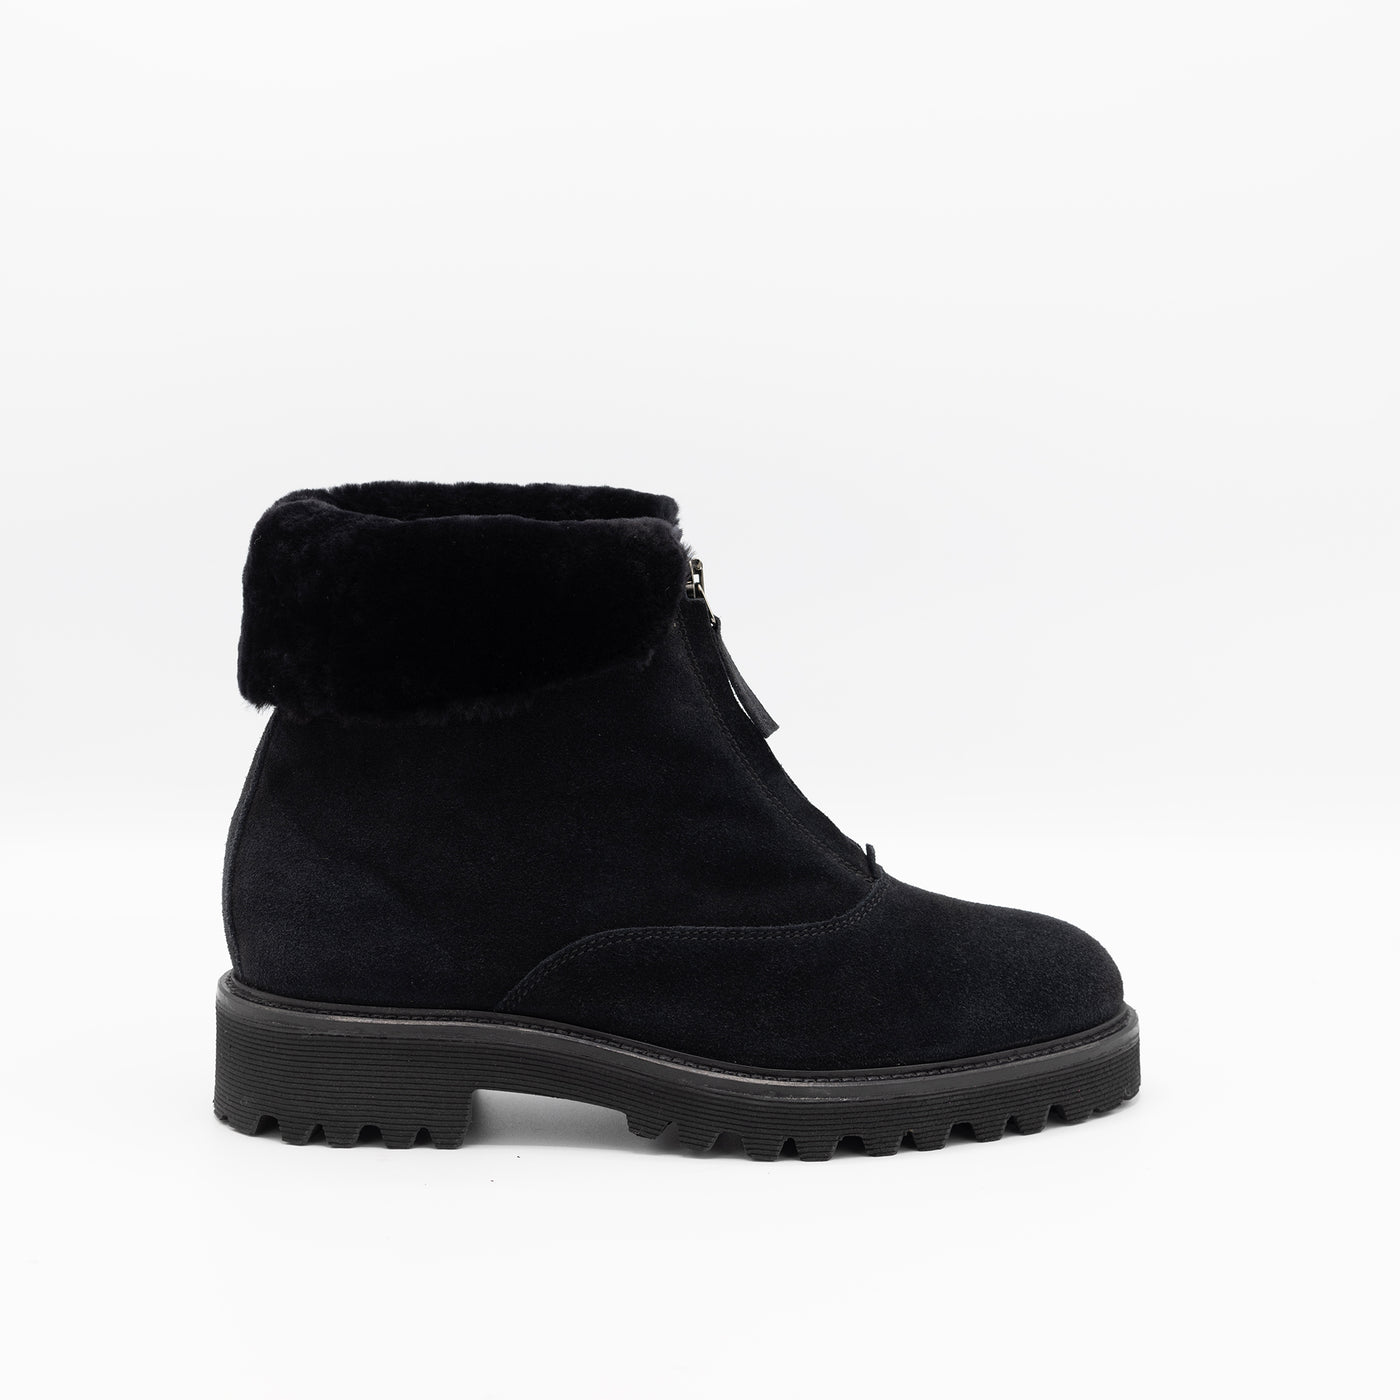 Zip Up Black Suede Shearling Boots